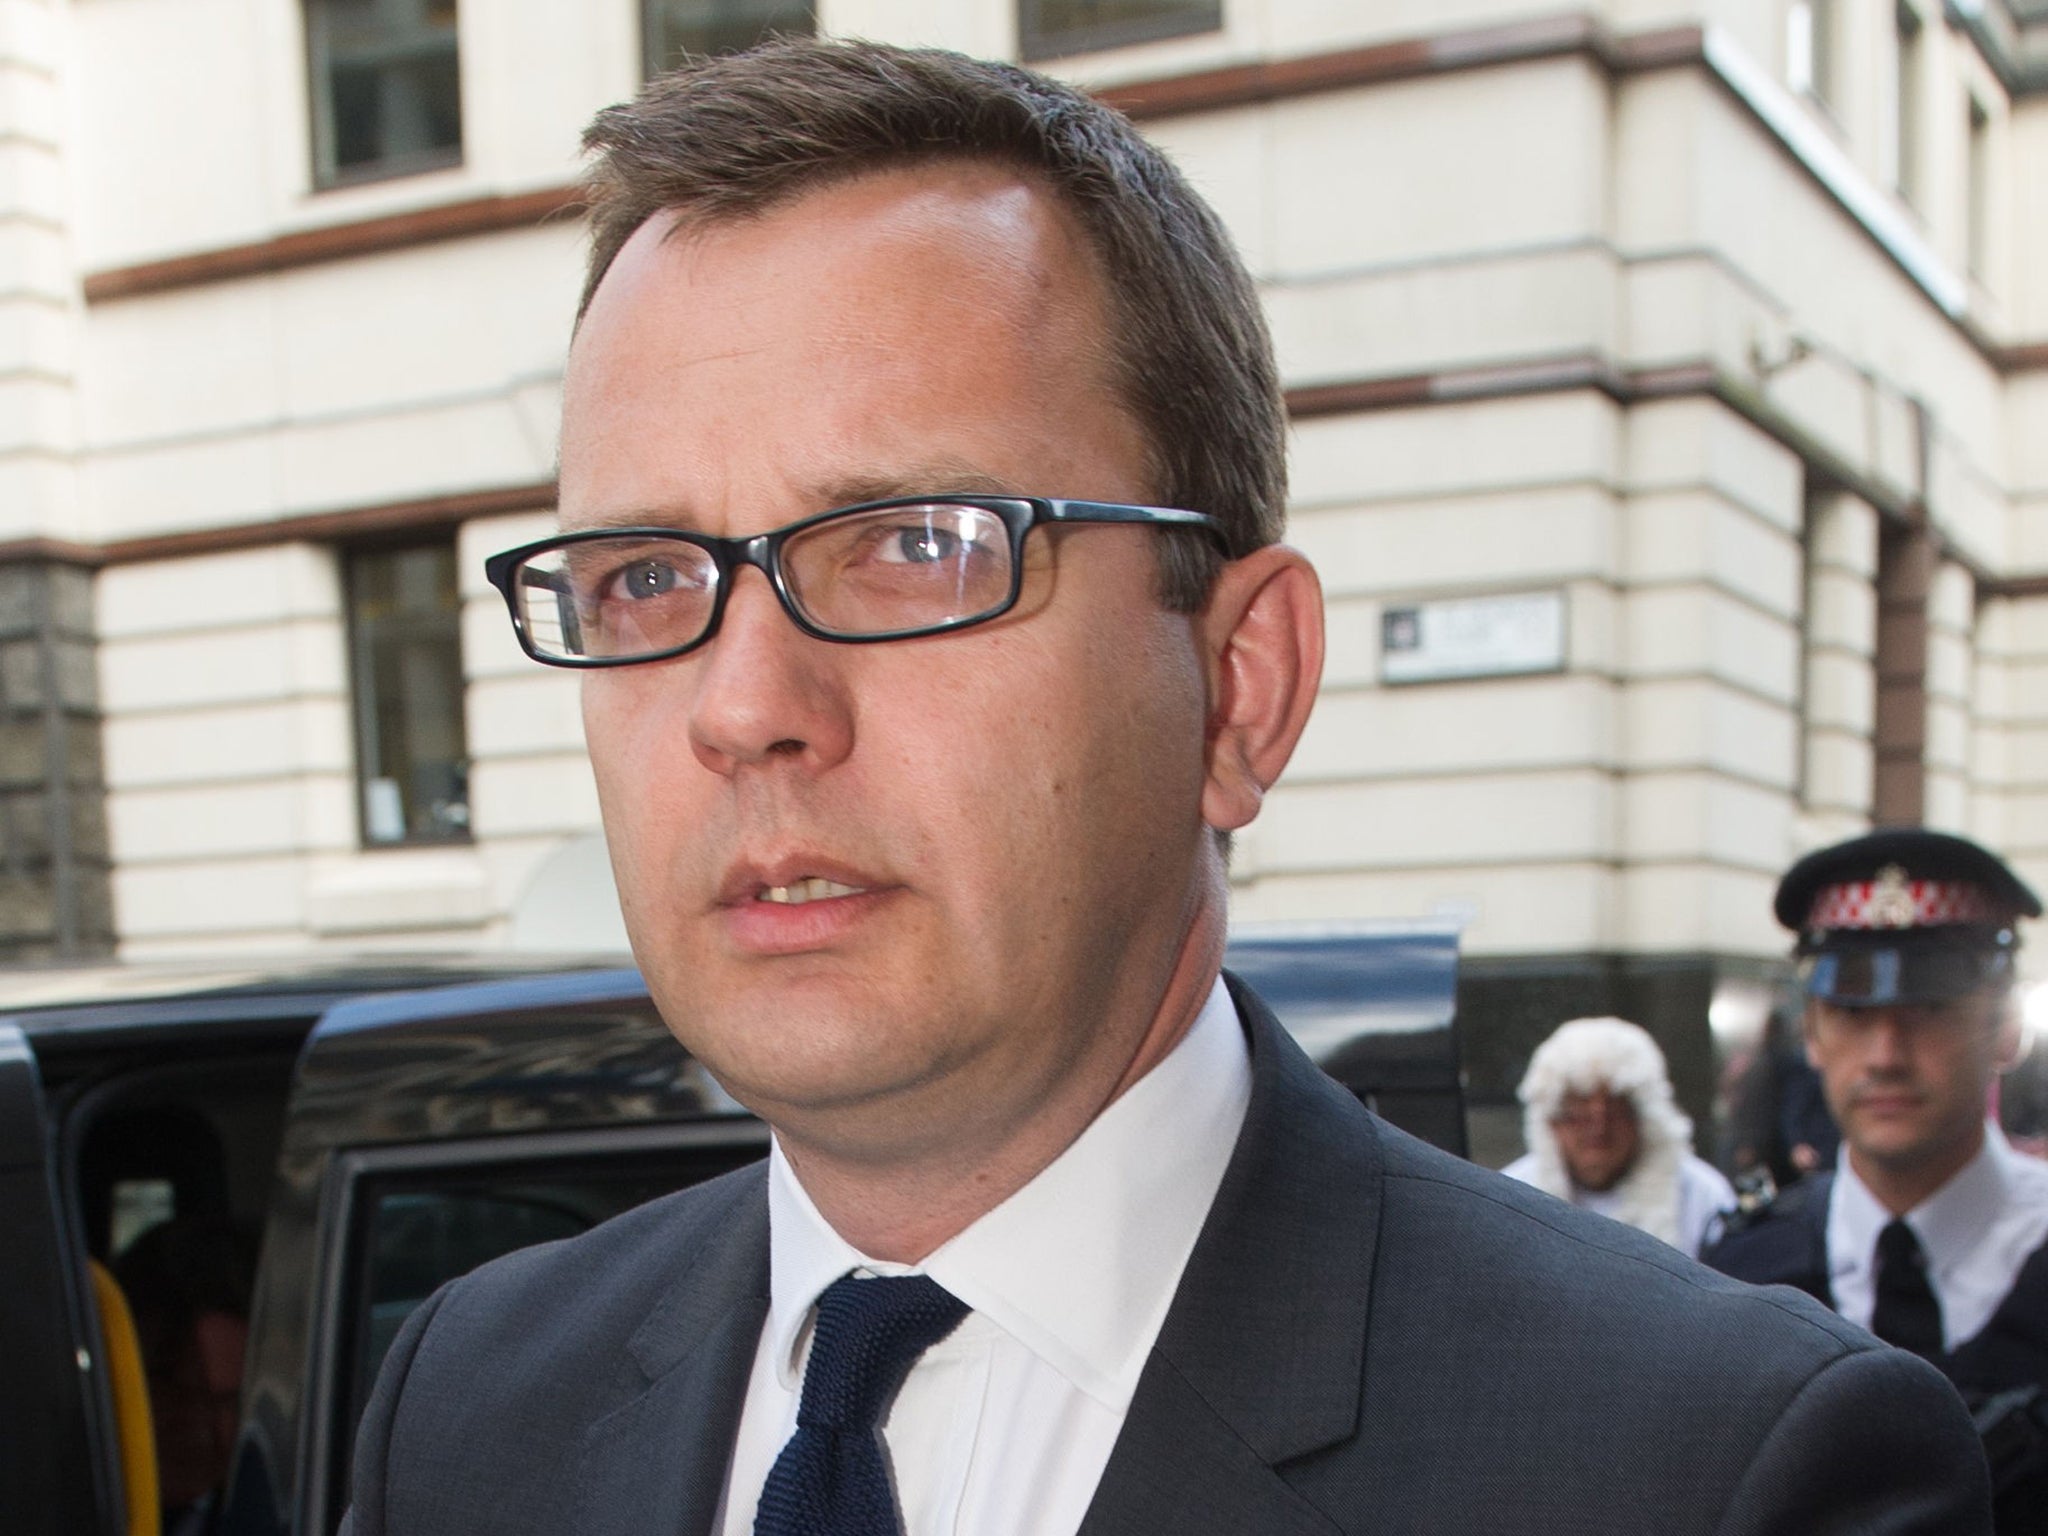 The Prime Minister's former spin doctor was jailed for 18 months for conspiring to hack phones